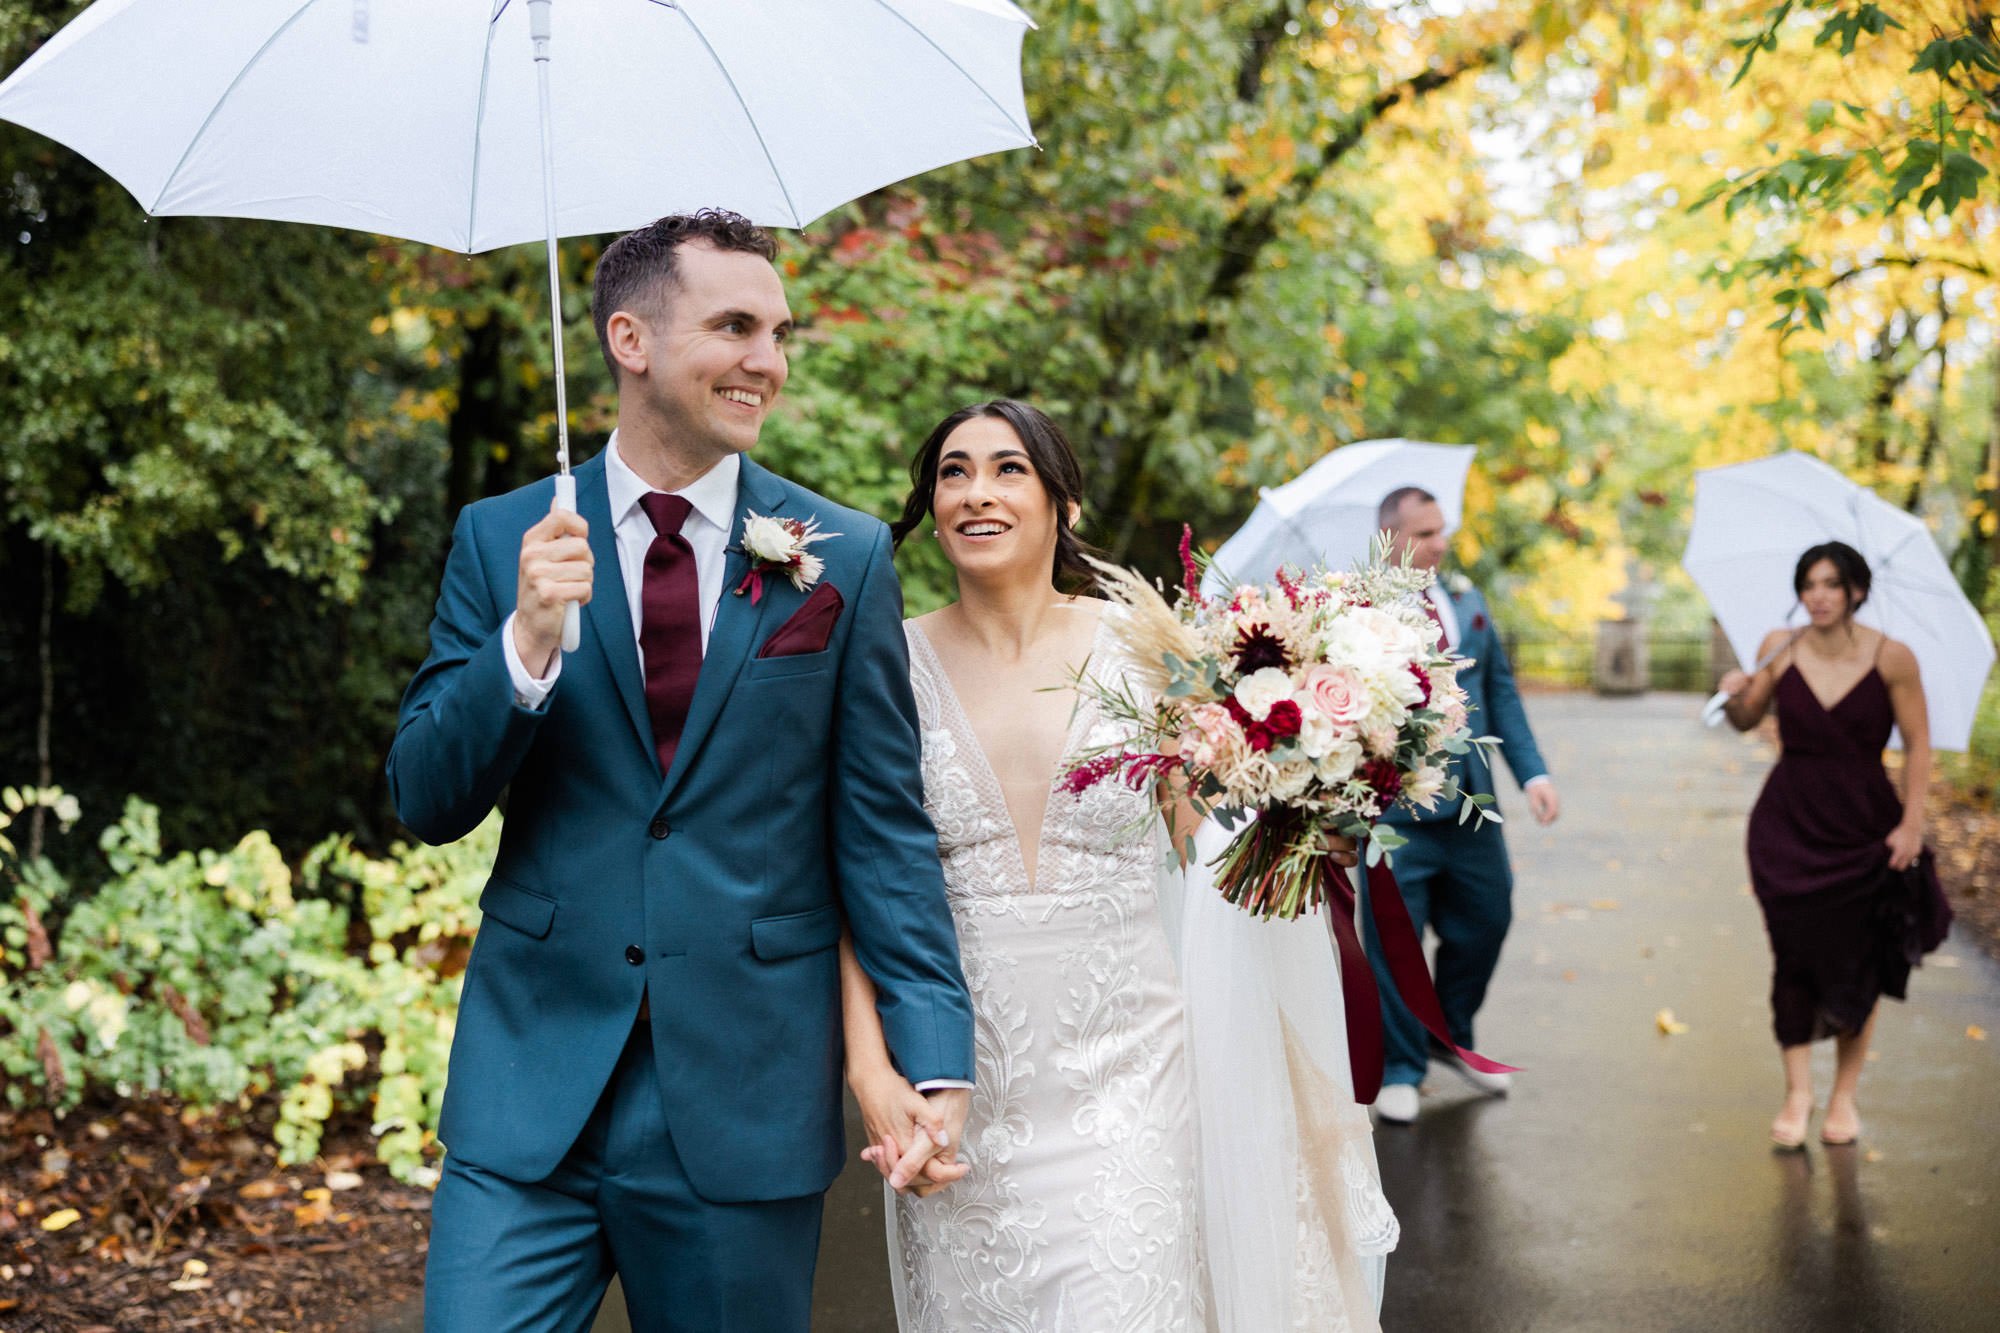 bride and groom walk through park holding white umbrella in front of bridal party